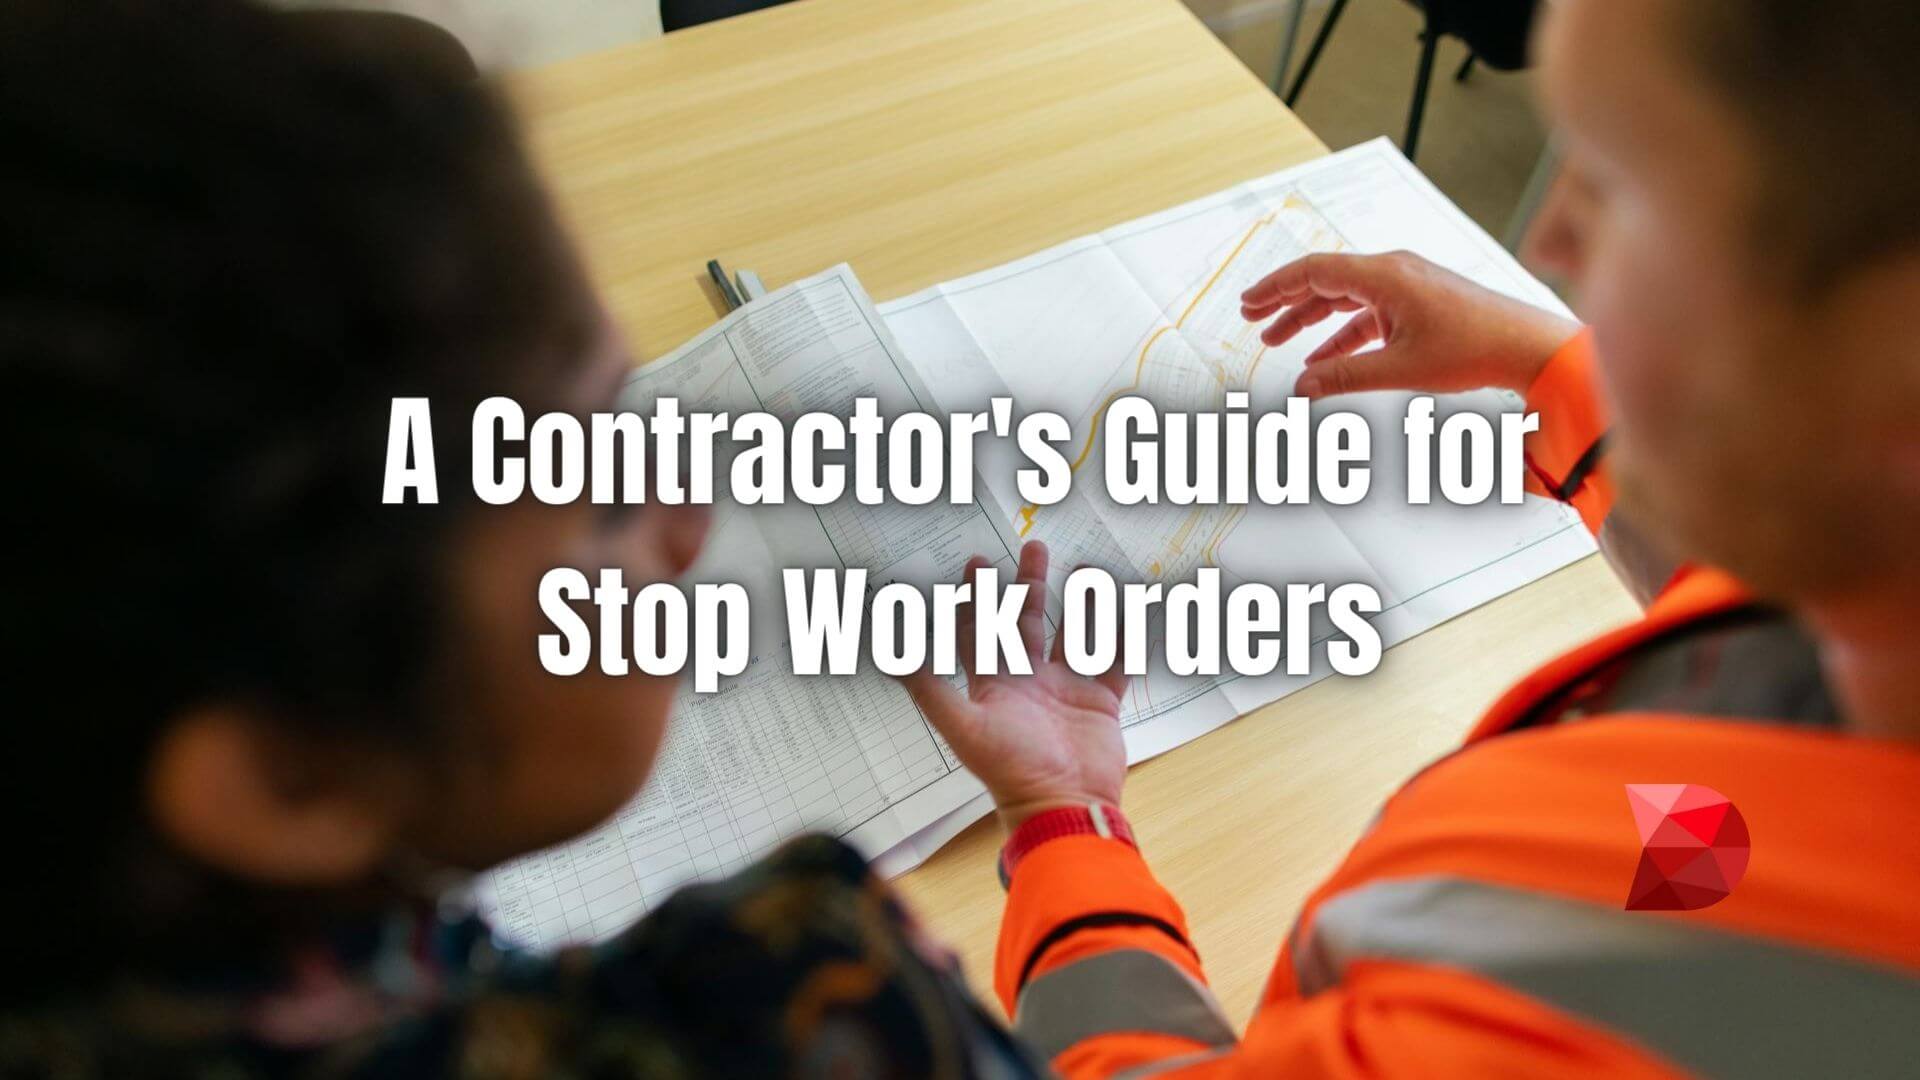 Stay ahead of stop work orders with our expert contractor's guide. Learn how to anticipate, manage, and resolve stoppages with confidence.